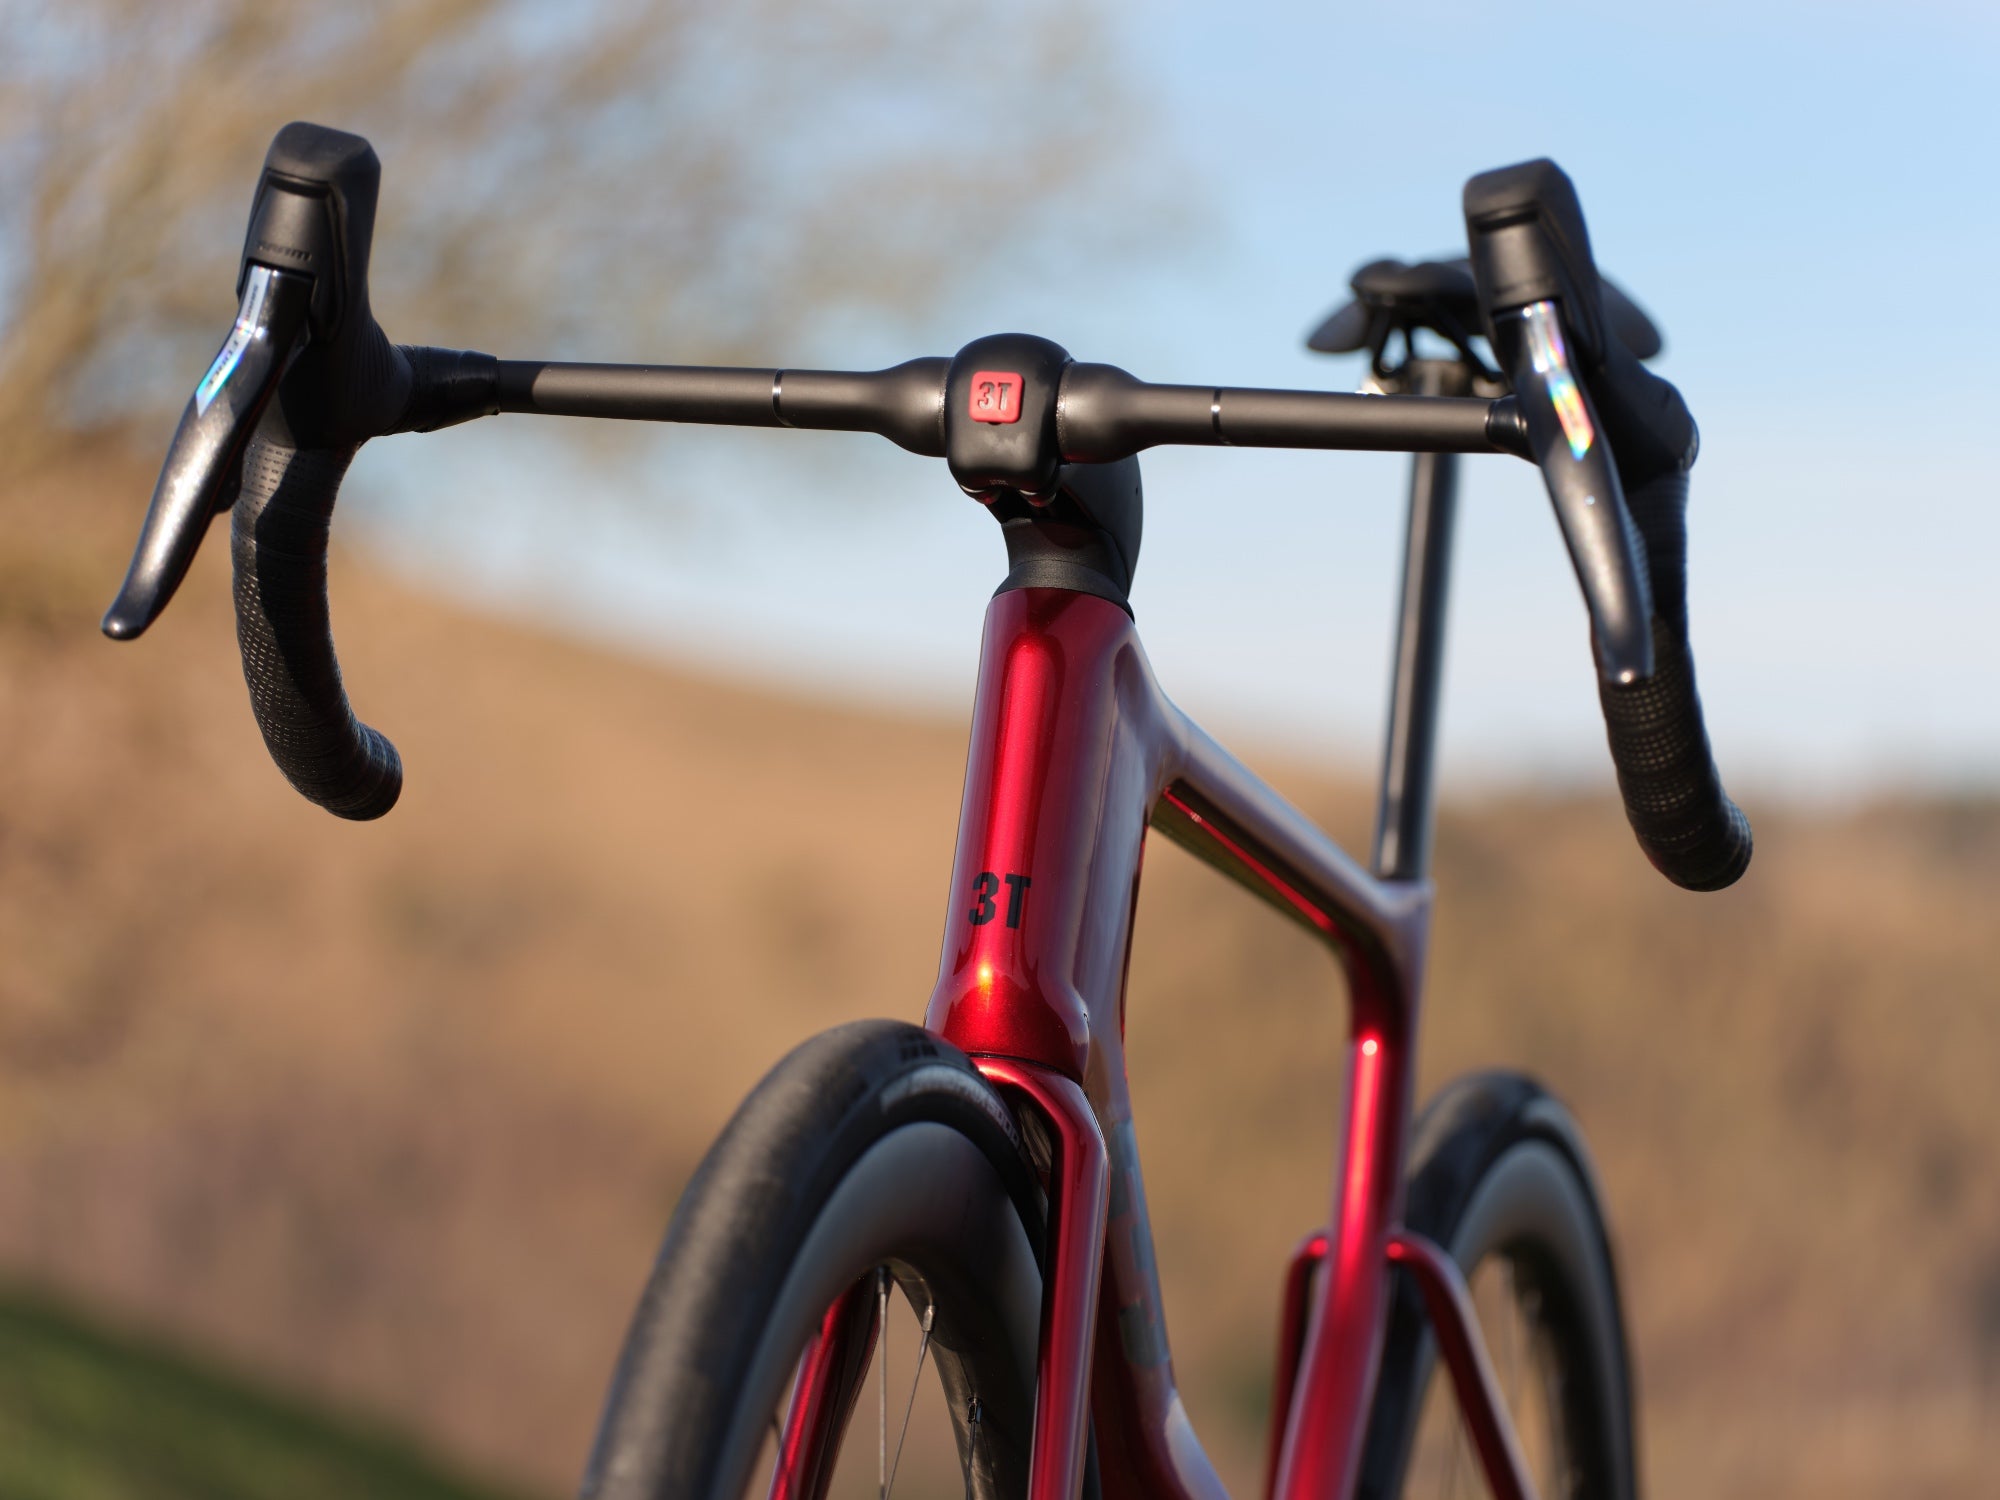 3T Strada Italia in red from the front